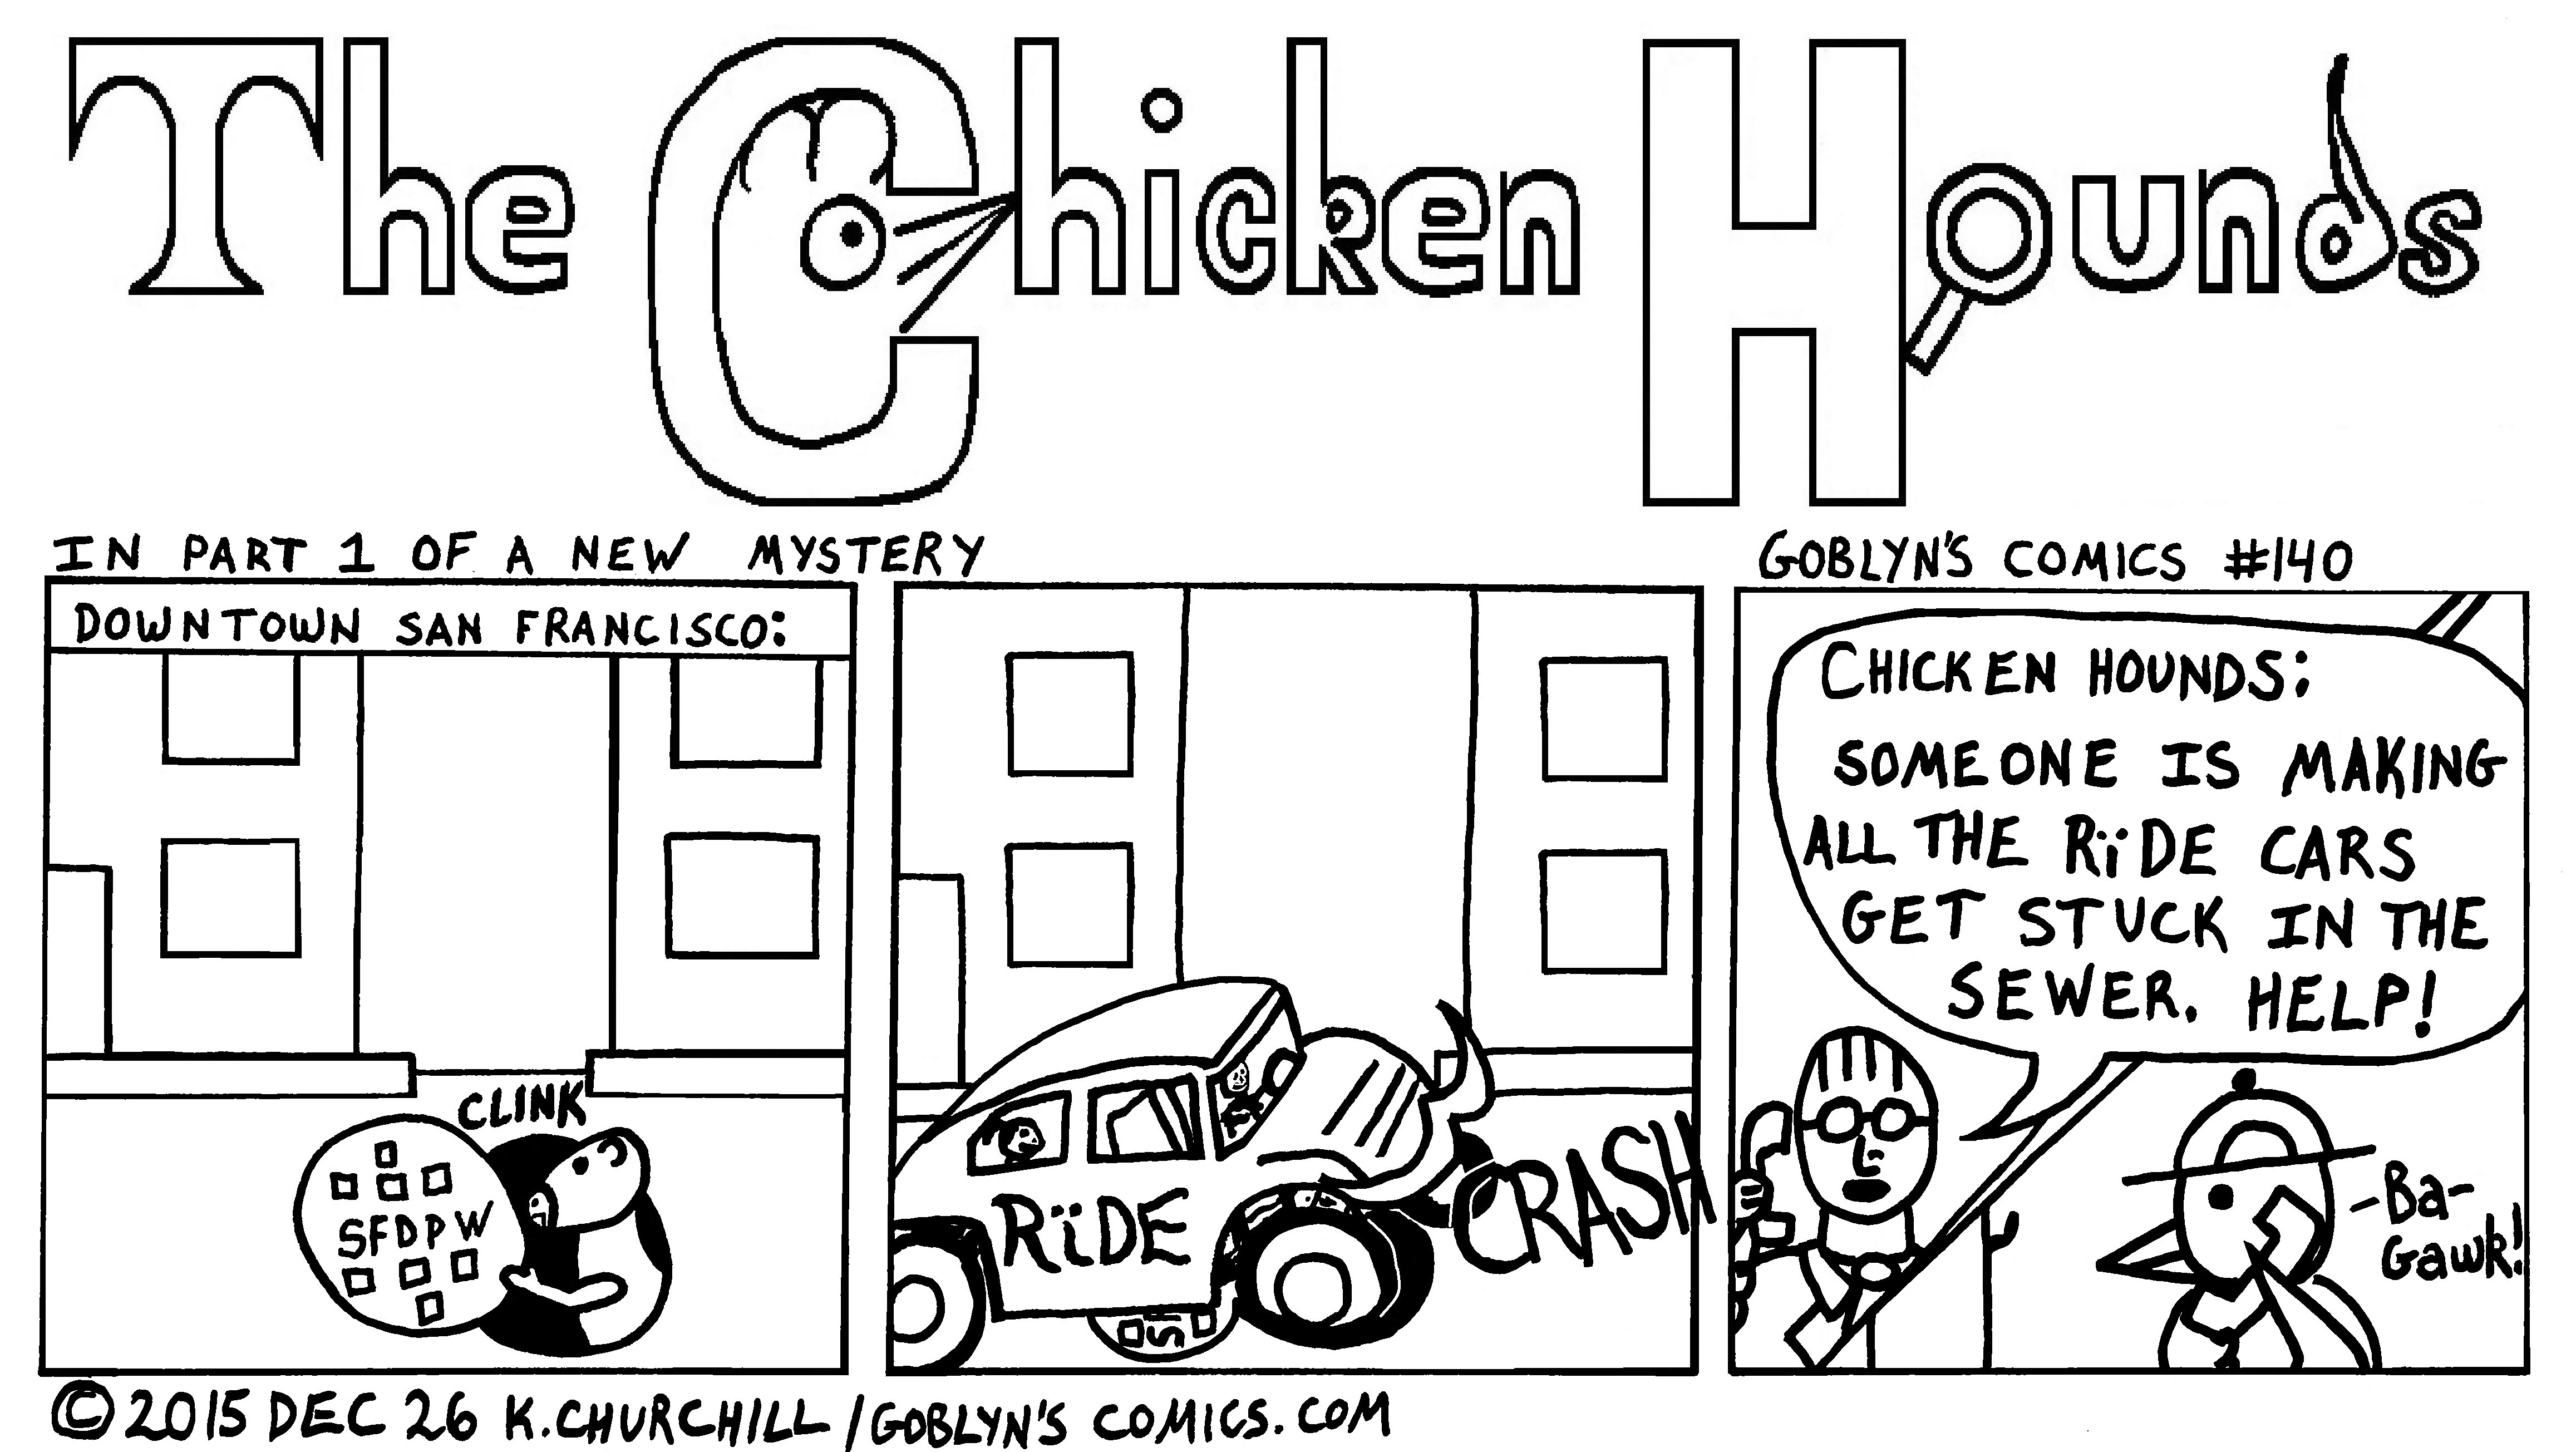 The Chicken Hounds in a new Mystery